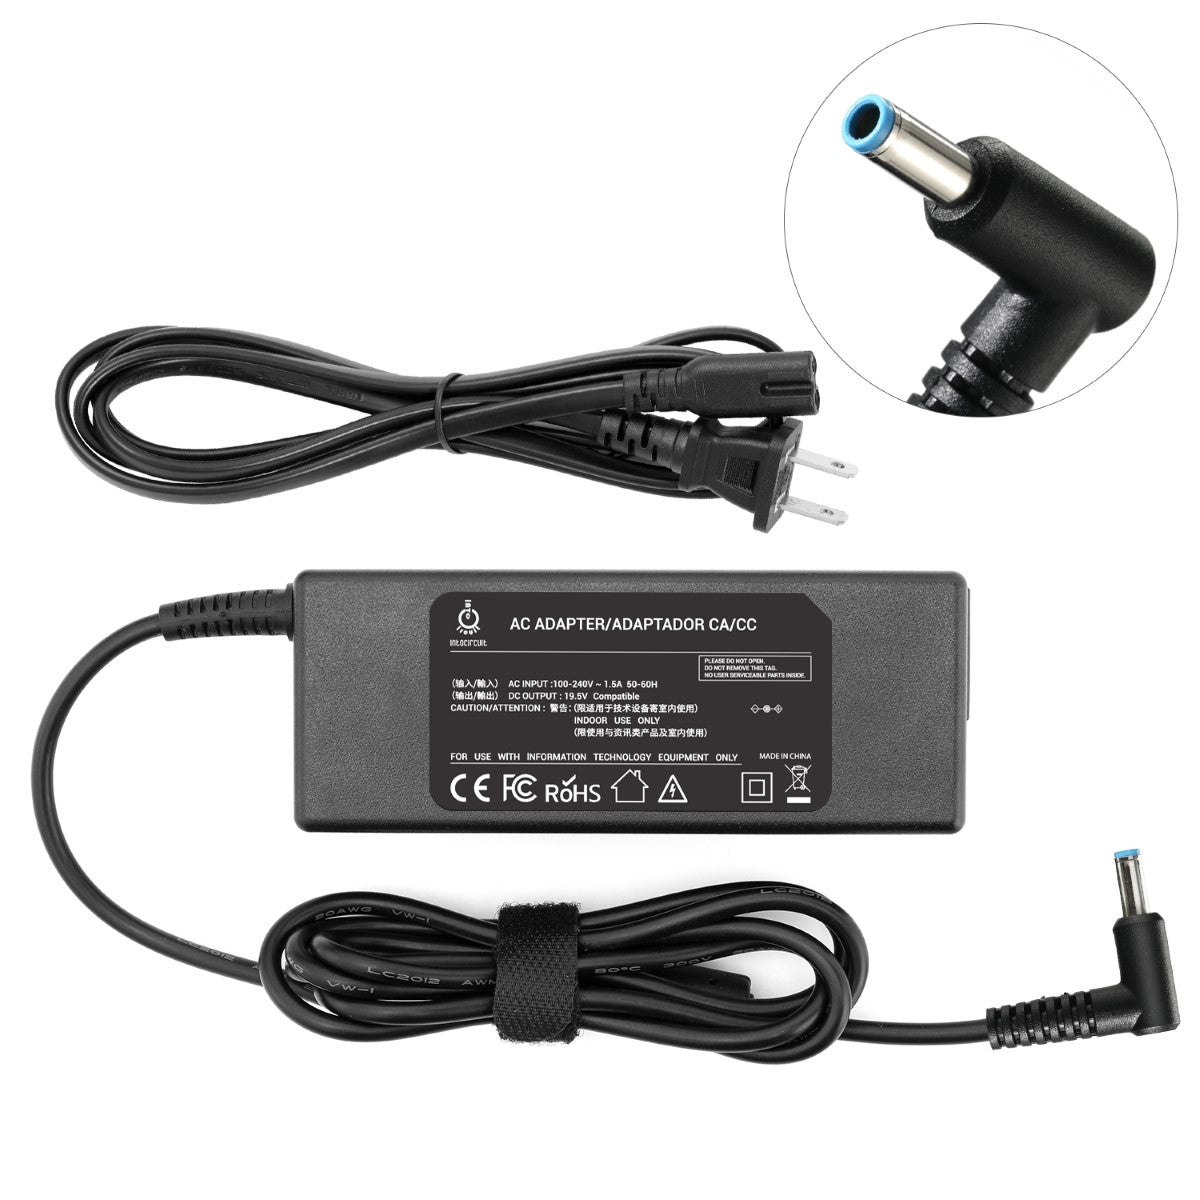 Charger for HP 340 G1 F7V09UT Notebook